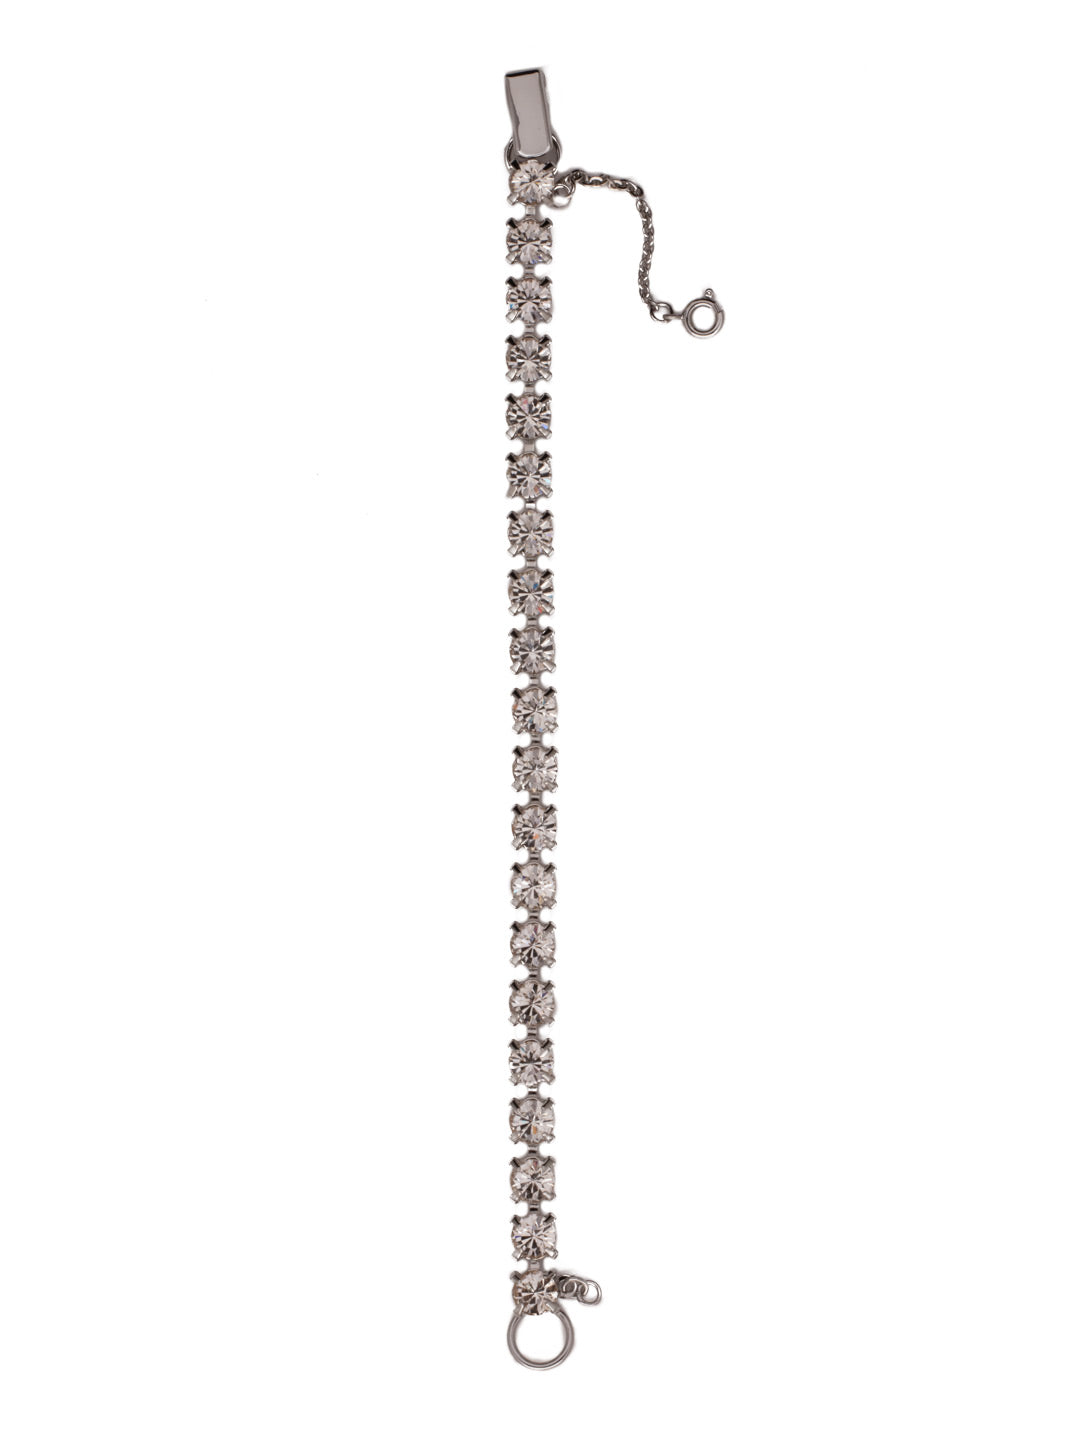 Elsie Tennis Bracelet - BEZ30PDCRY - <p>The Elsie Tennis Bracelet is a classic style that can be worn everywhere. A line of round cut crystals wraps around the full length of the bracelet and secures with a fold-over clasp. From Sorrelli's Crystal collection in our Palladium finish.</p>